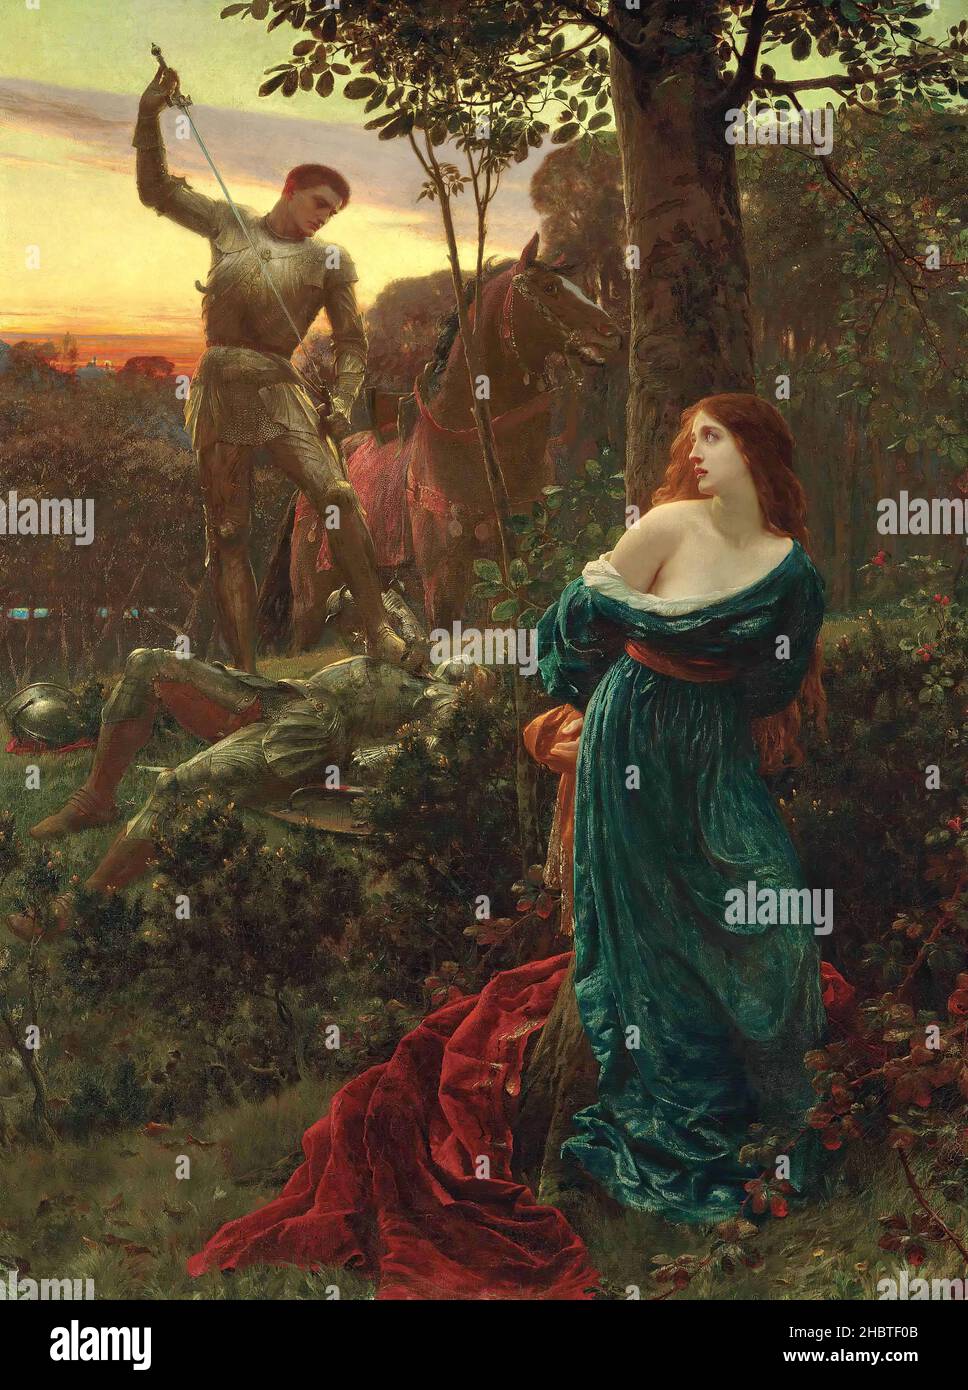 Paper Print 24 x 36 inches The Beautiful Lady without Mercy La Belle Dame sans Merci by Artist Sir Frank Bernard Dicksee